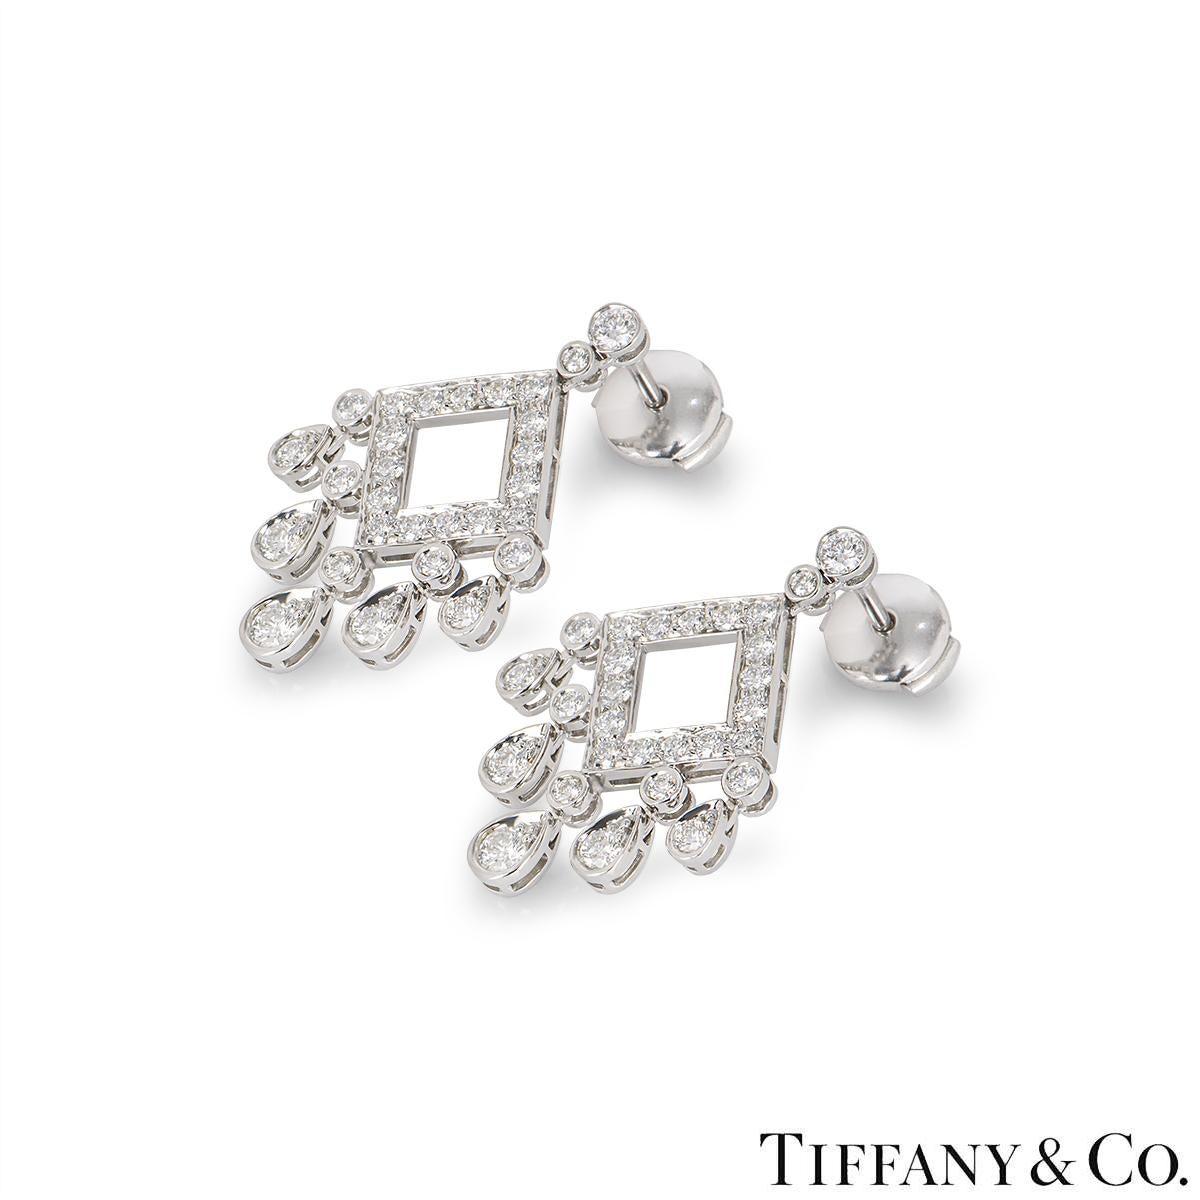 A gorgeous pair of platinum diamond chandelier earrings by Tiffany & Co. from the Legacy collection. The earrings are set to the top with two graduating round brilliant cut diamonds leading to an open work kite motif with 5 strands suspended from